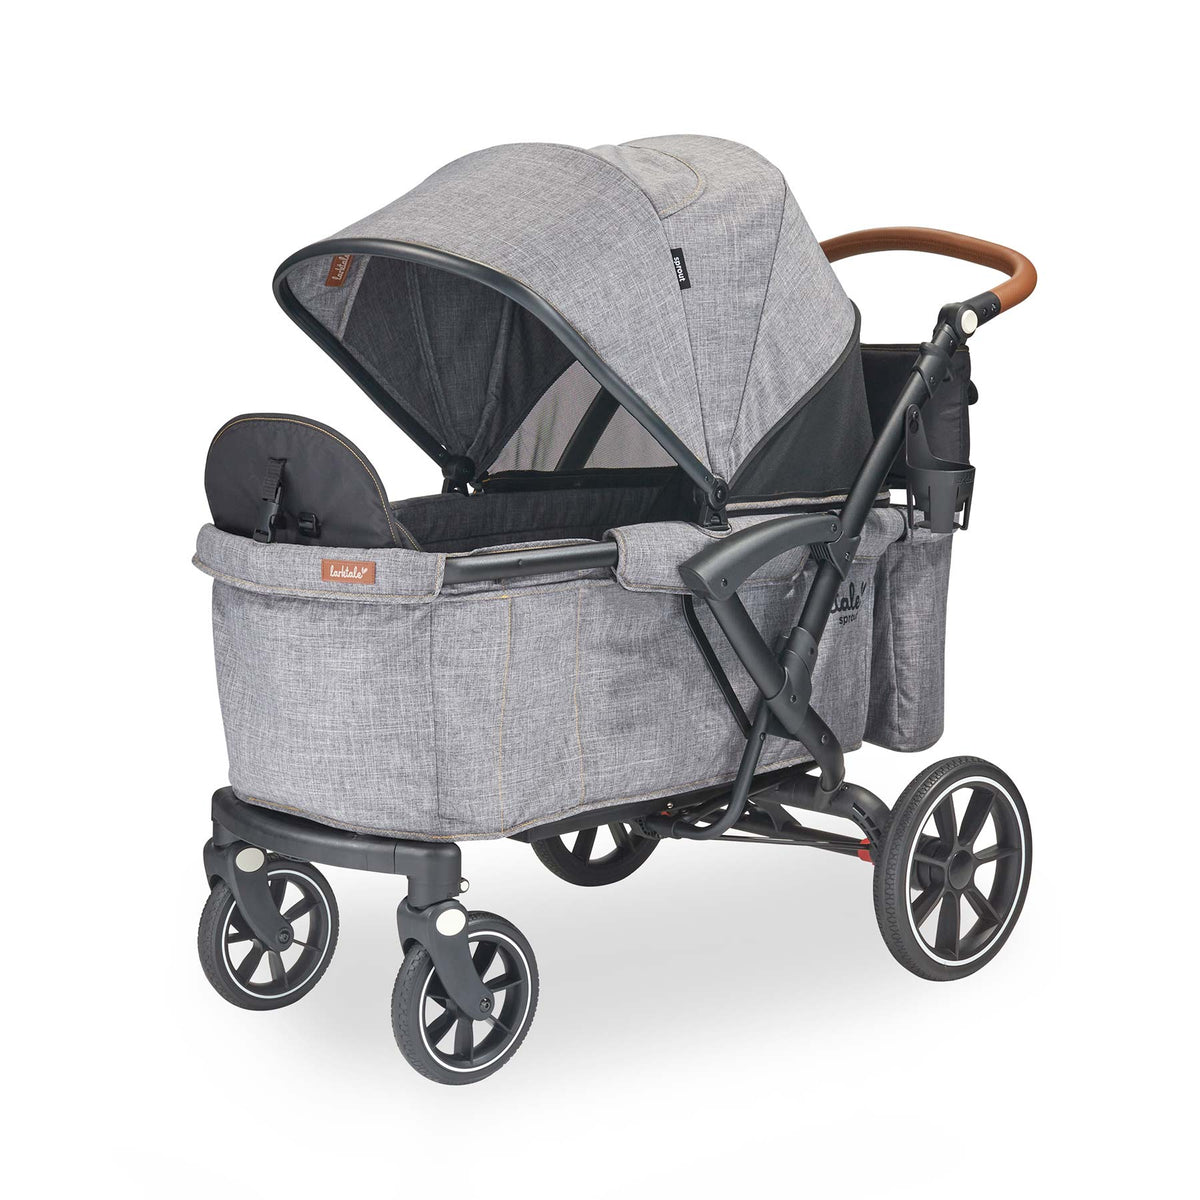 færge redde lyse Larktale sprout Single-to-Double Stroller/Wagon | Wagon for Kids, Babies,  Toddlers | Multi-Purpose Baby Gear